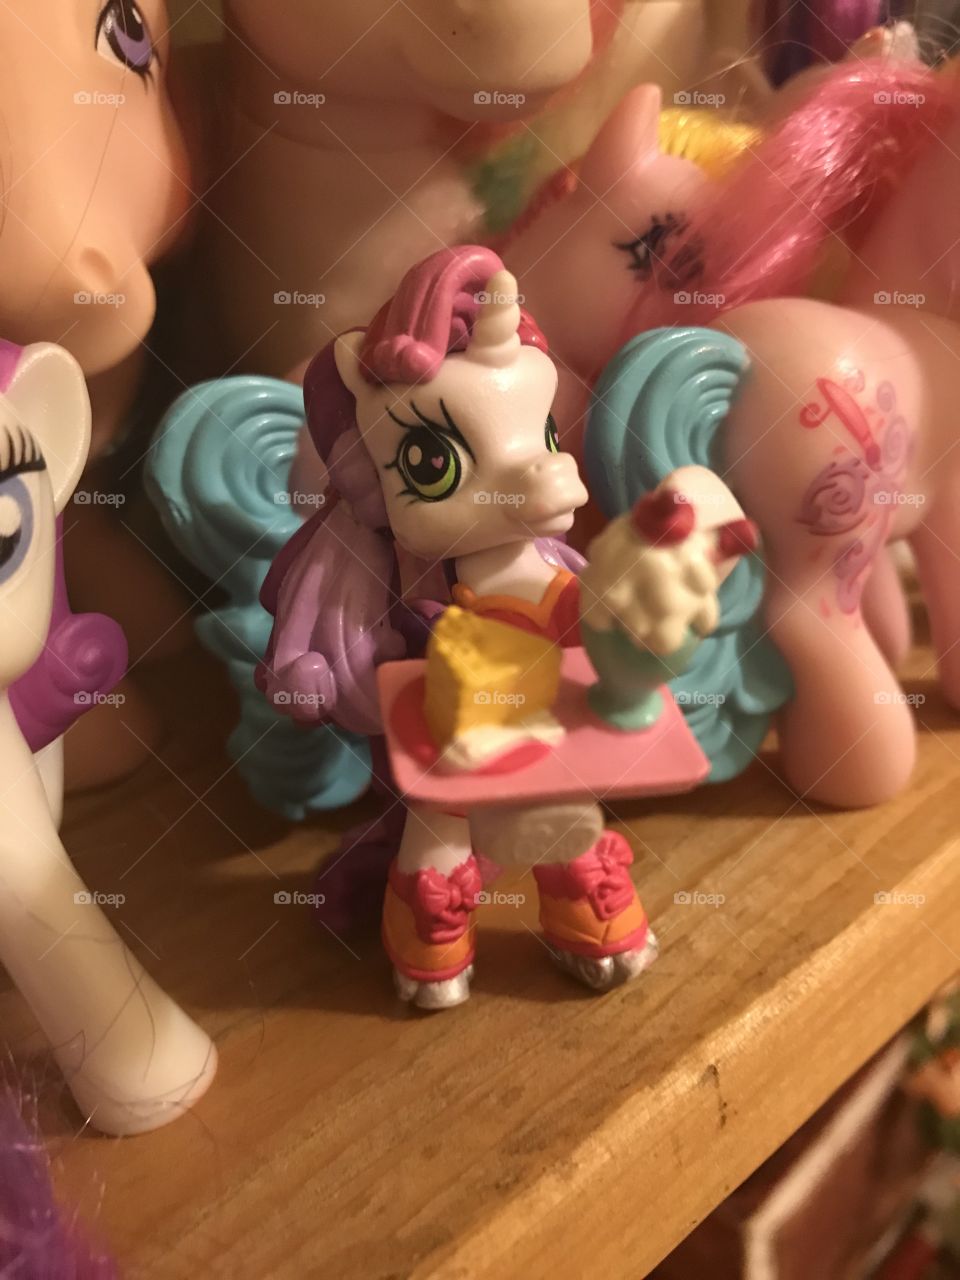 A My Little Pony toy of a skateboarding pony carrying food, surrounded by other pony toys